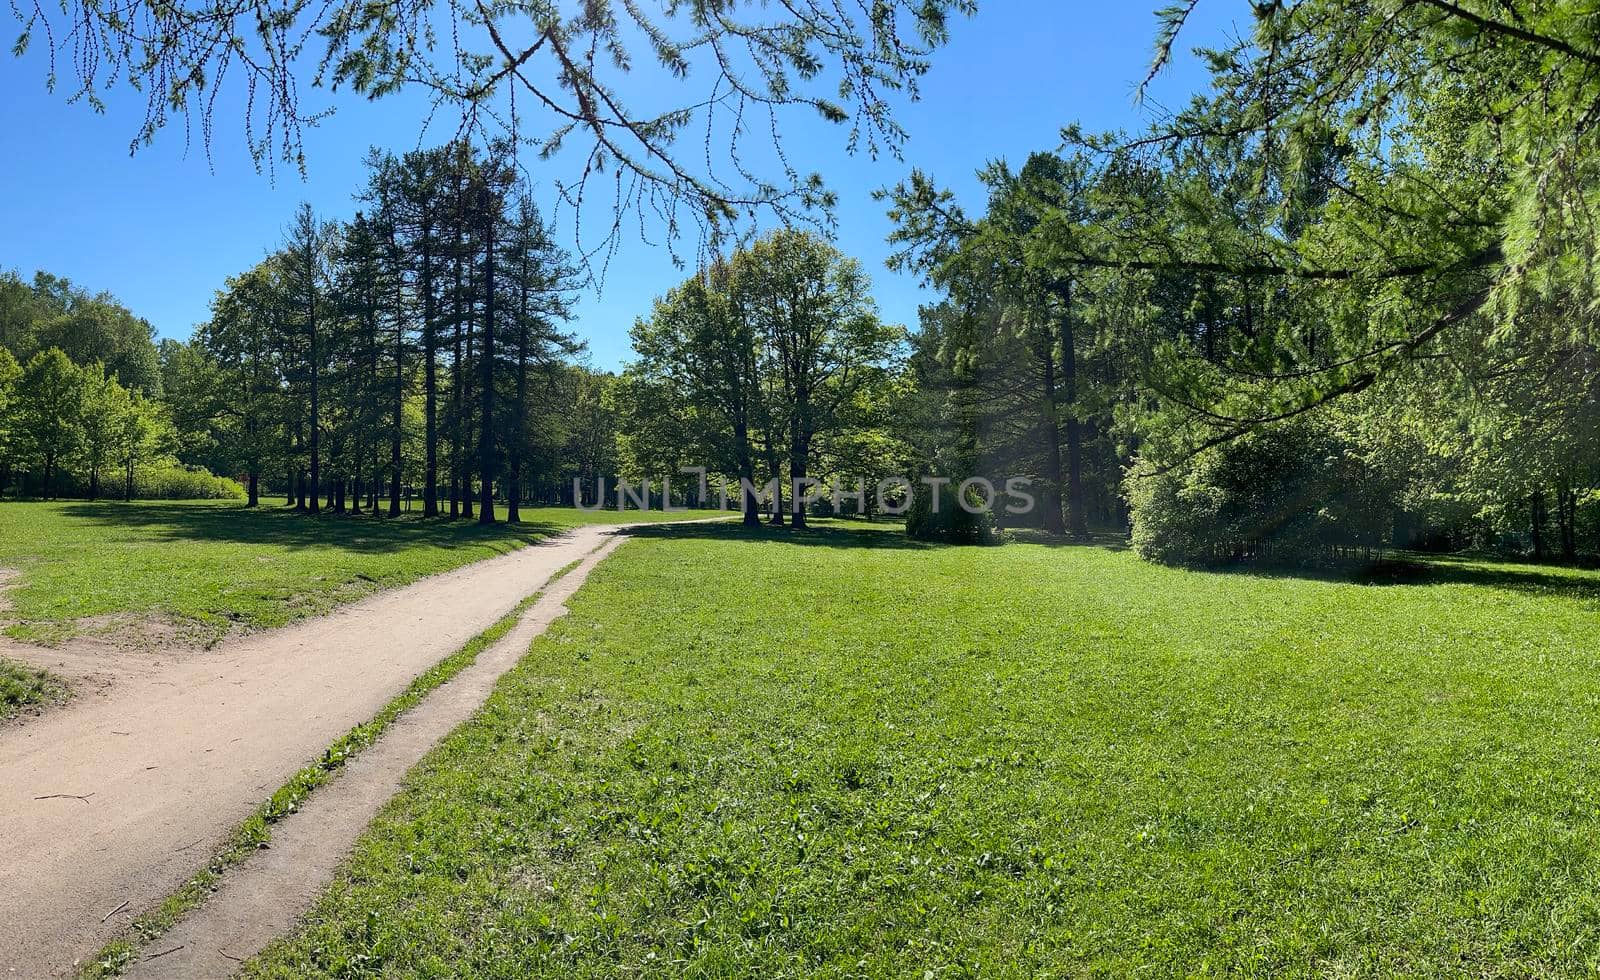 Panorama of first days of summer in a park, long shadows, blue sky, Buds of trees, Trunks of birches, sunny day, green meadow. High quality photo